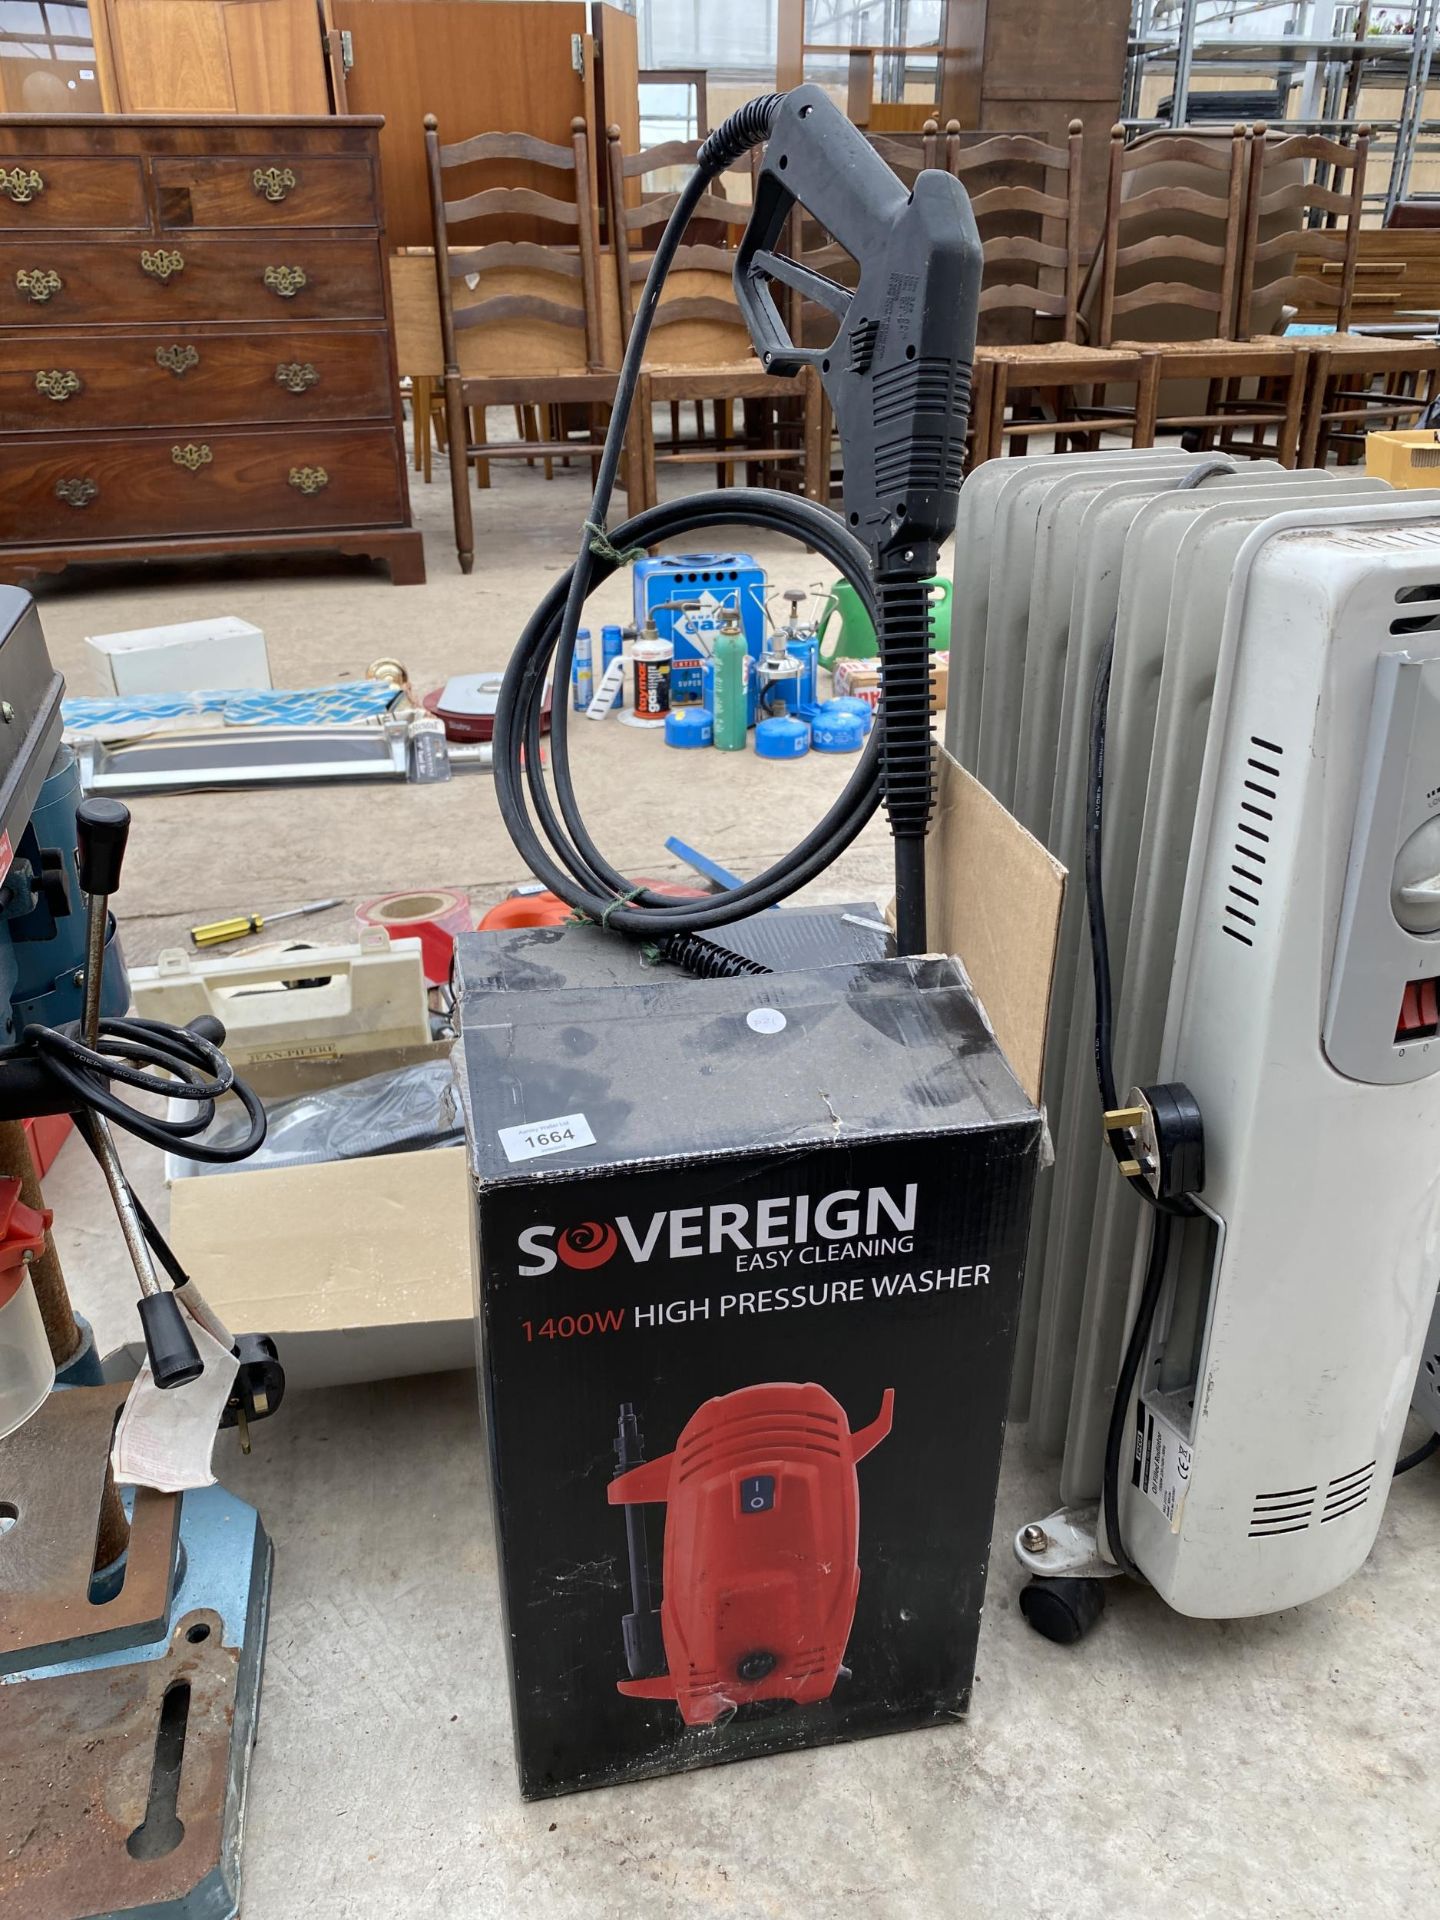 A SOVERIGN ELECTRIC PRESSURE WASHER